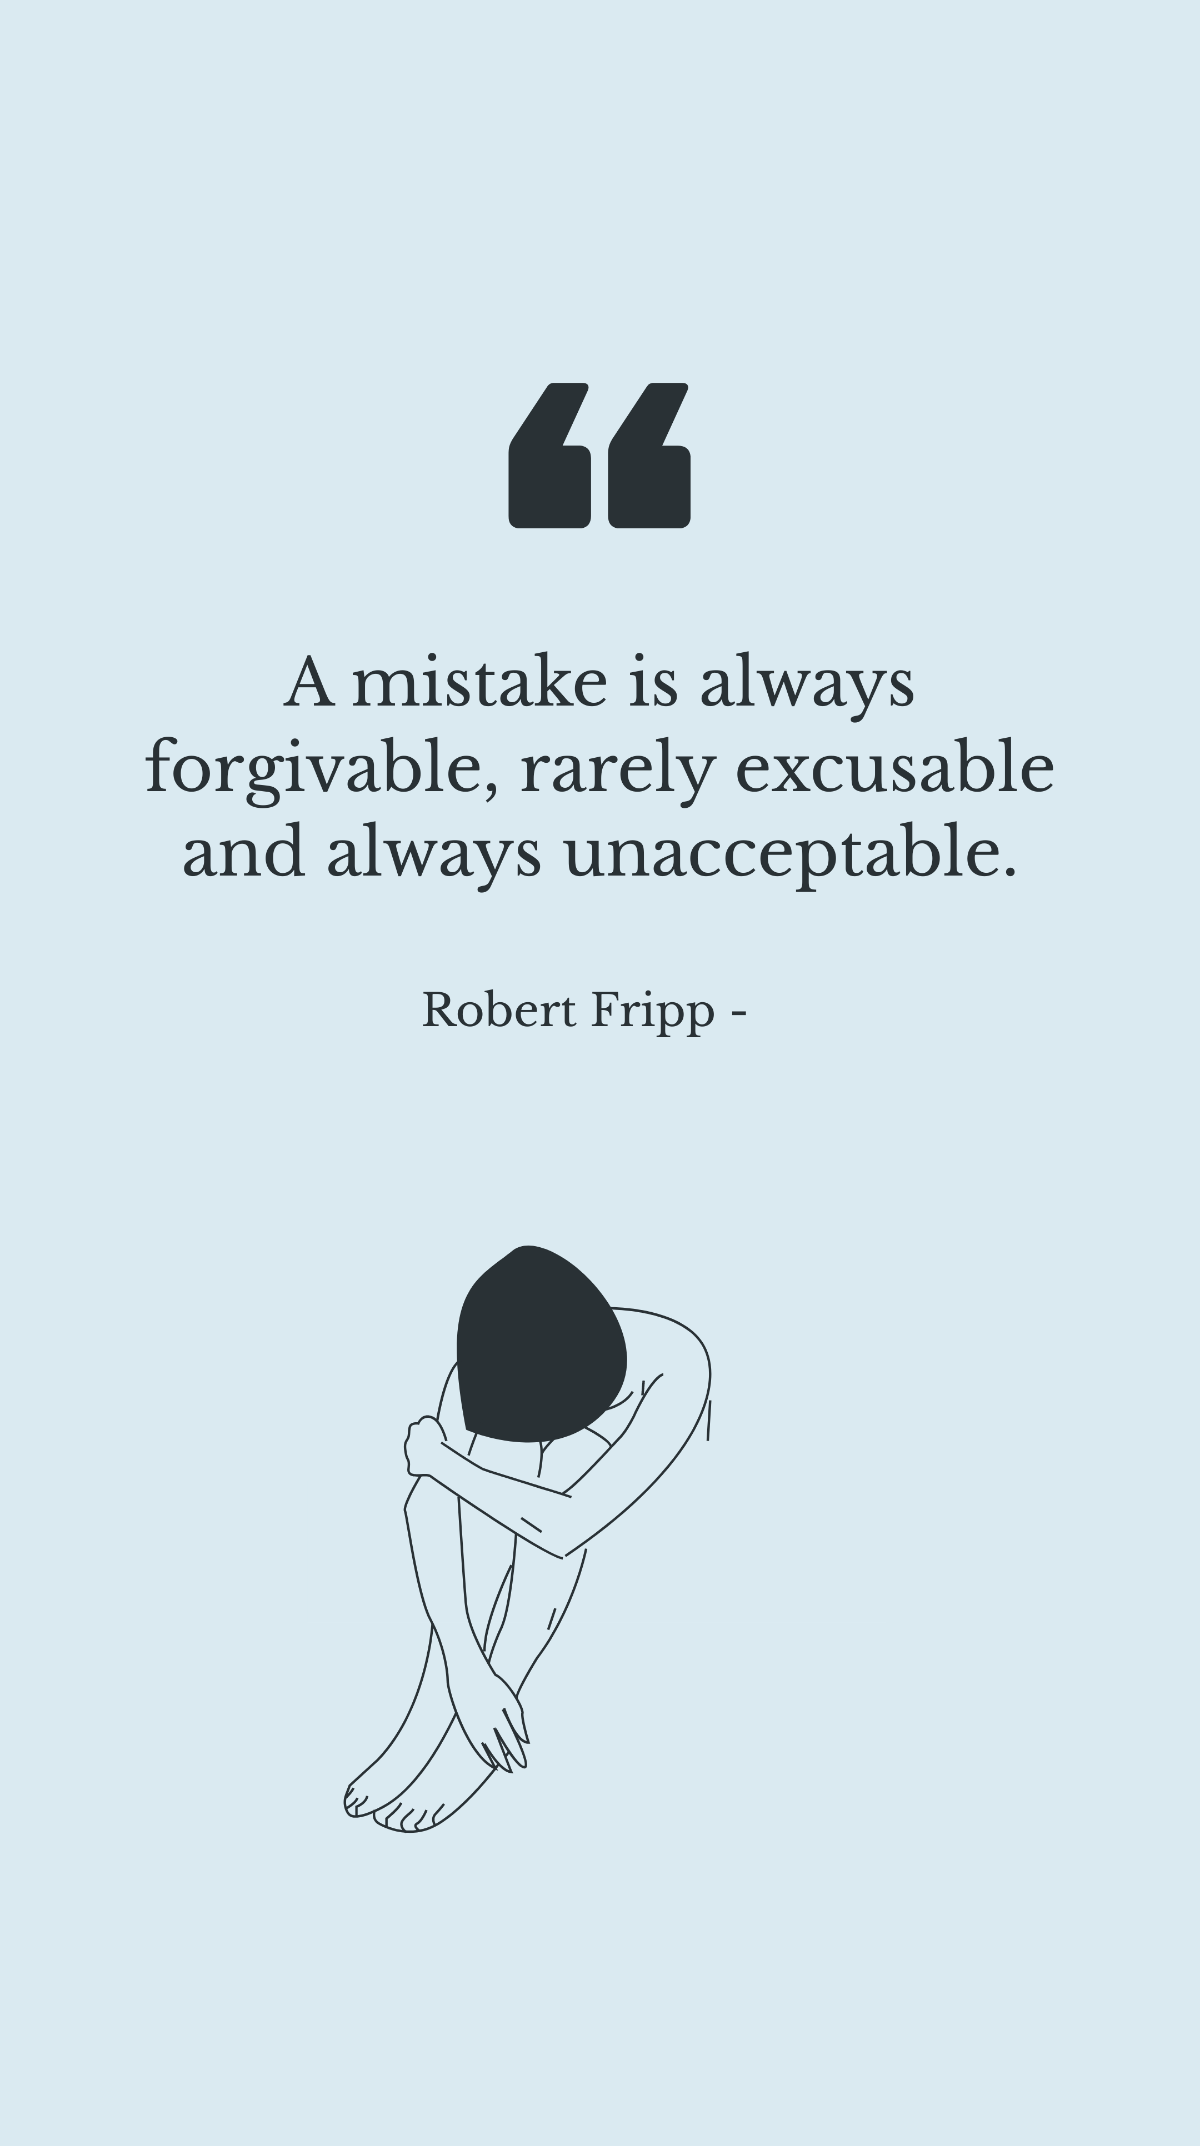 Free Robert Fripp - A mistake is always forgivable, rarely excusable and always unacceptable. Template